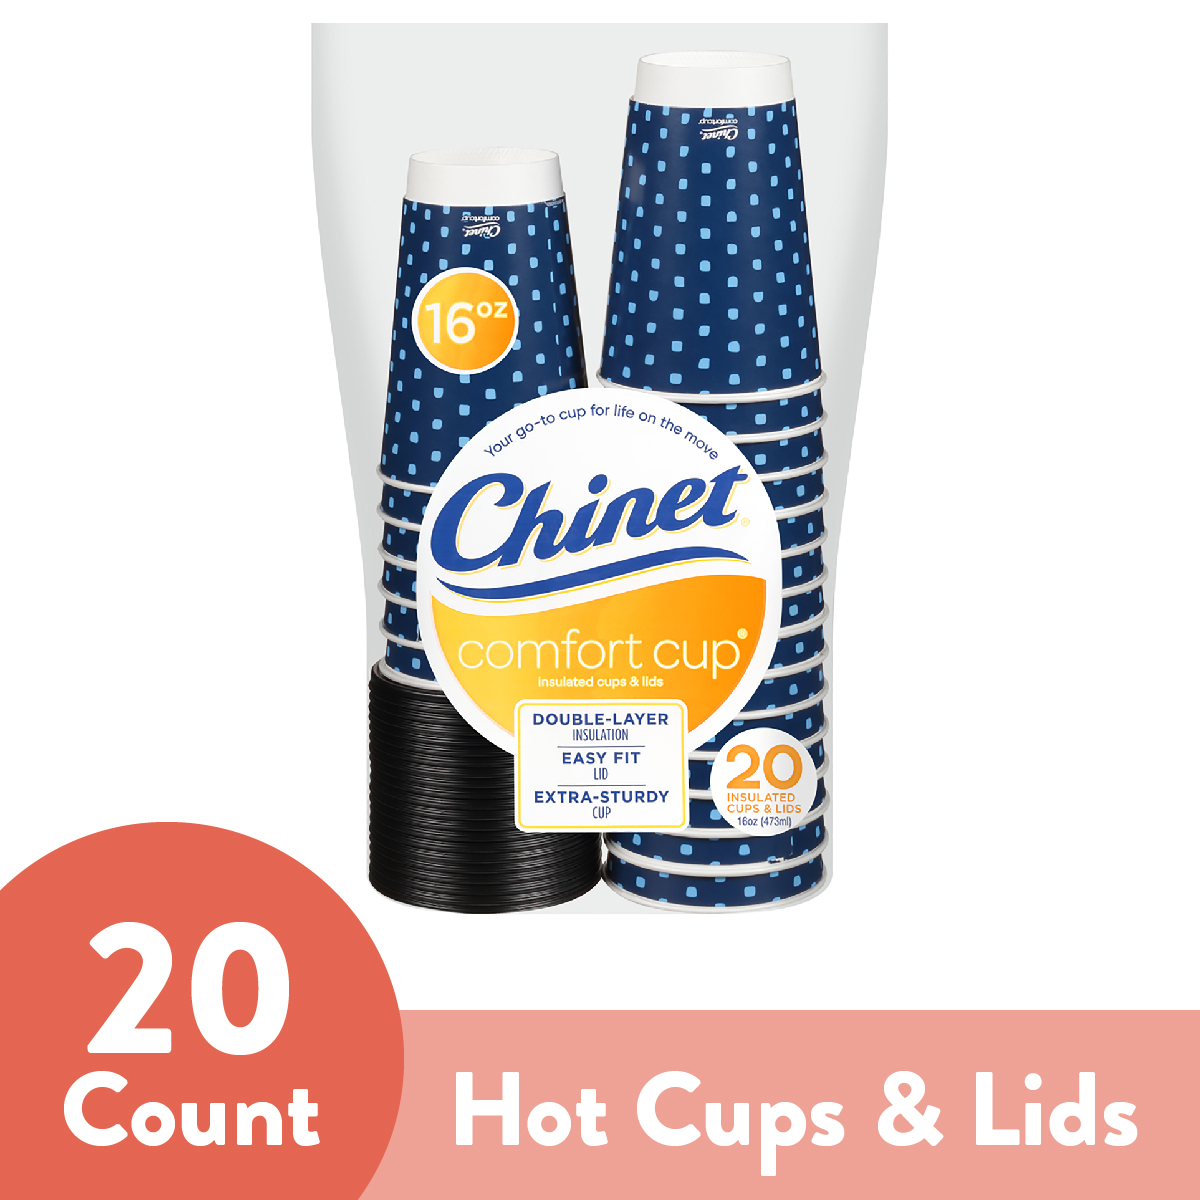 Comfort Cup By Chinet Cups & Lids, 16 Oz, 20 Count - image 1 of 6